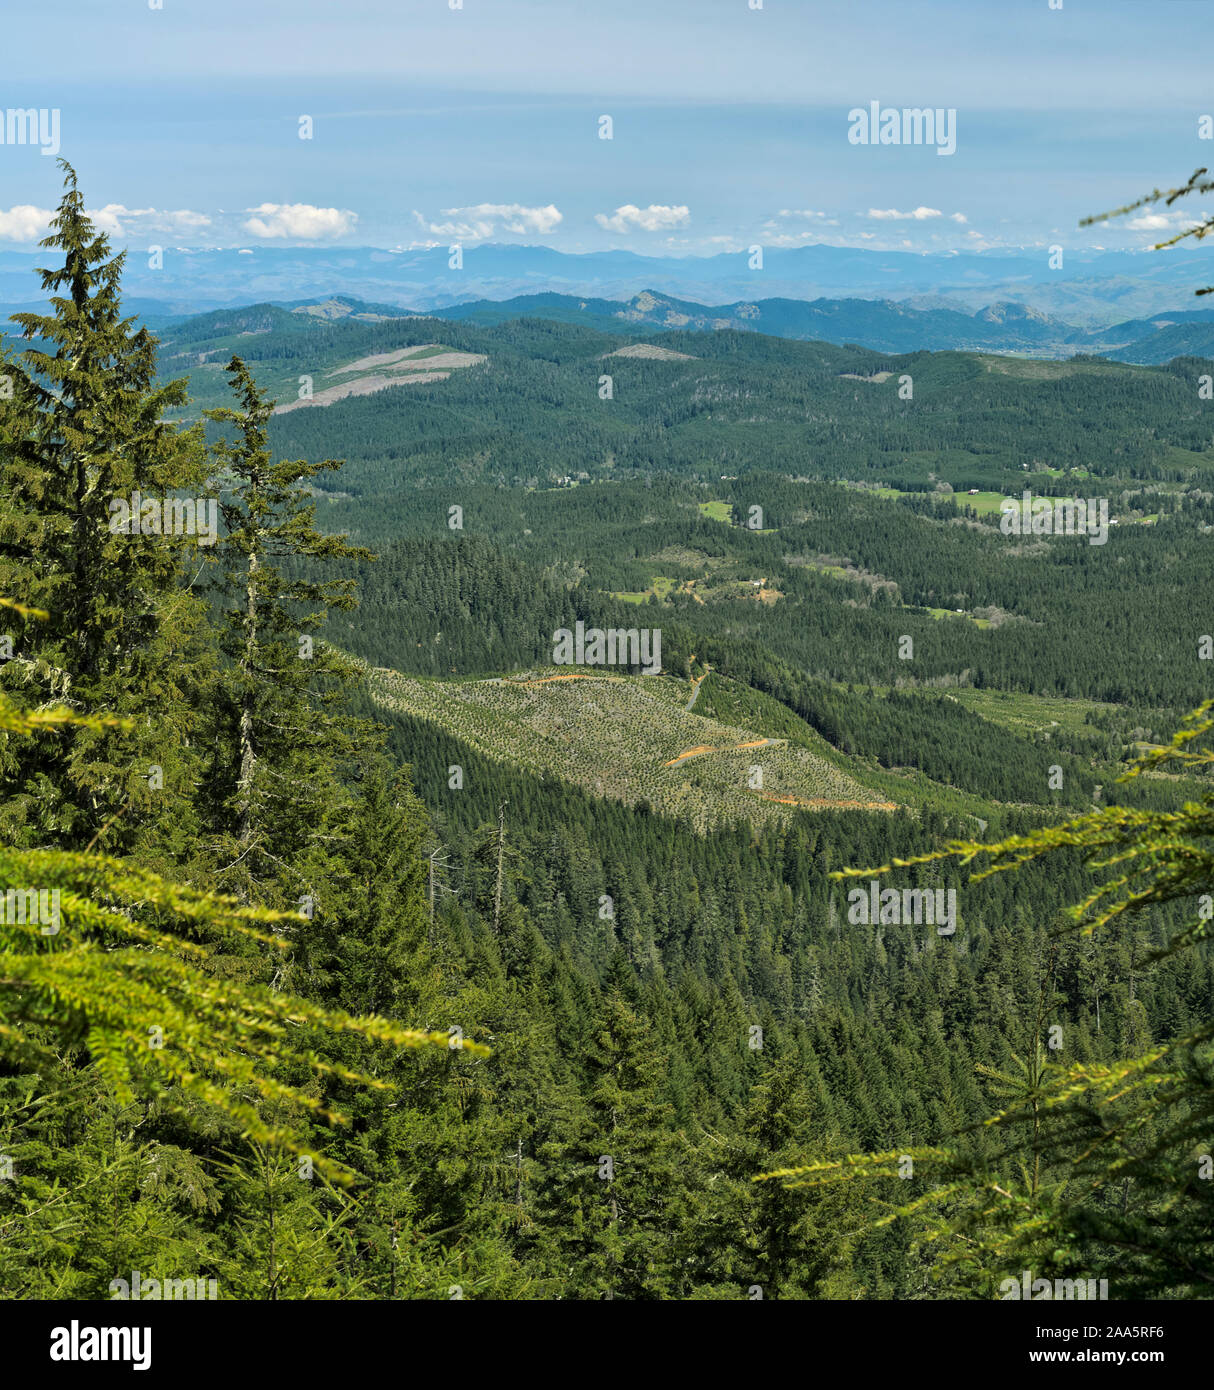 In the Oregon Coast Range near Coos Bay, a view from Bureau of Land Management (BLM) lands over the Camas Valley, showing clearcut forest patches Stock Photo